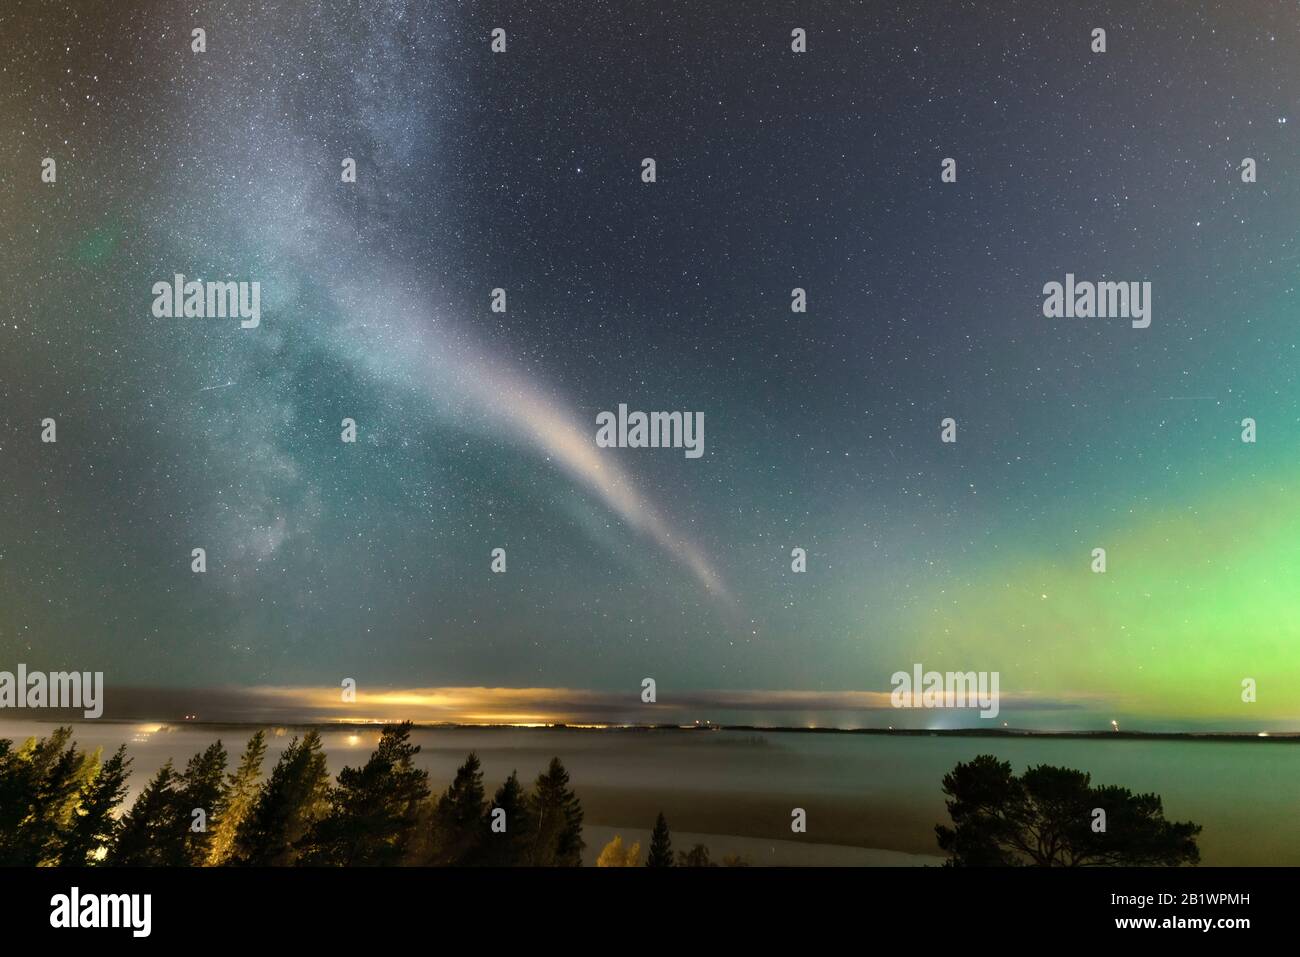 Weak Northern Lights on horizon and atmospheric phenomenon 'STEVE' crossing Milky Way. Steve appears as a purple and green light ribbon in the sky at Stock Photo